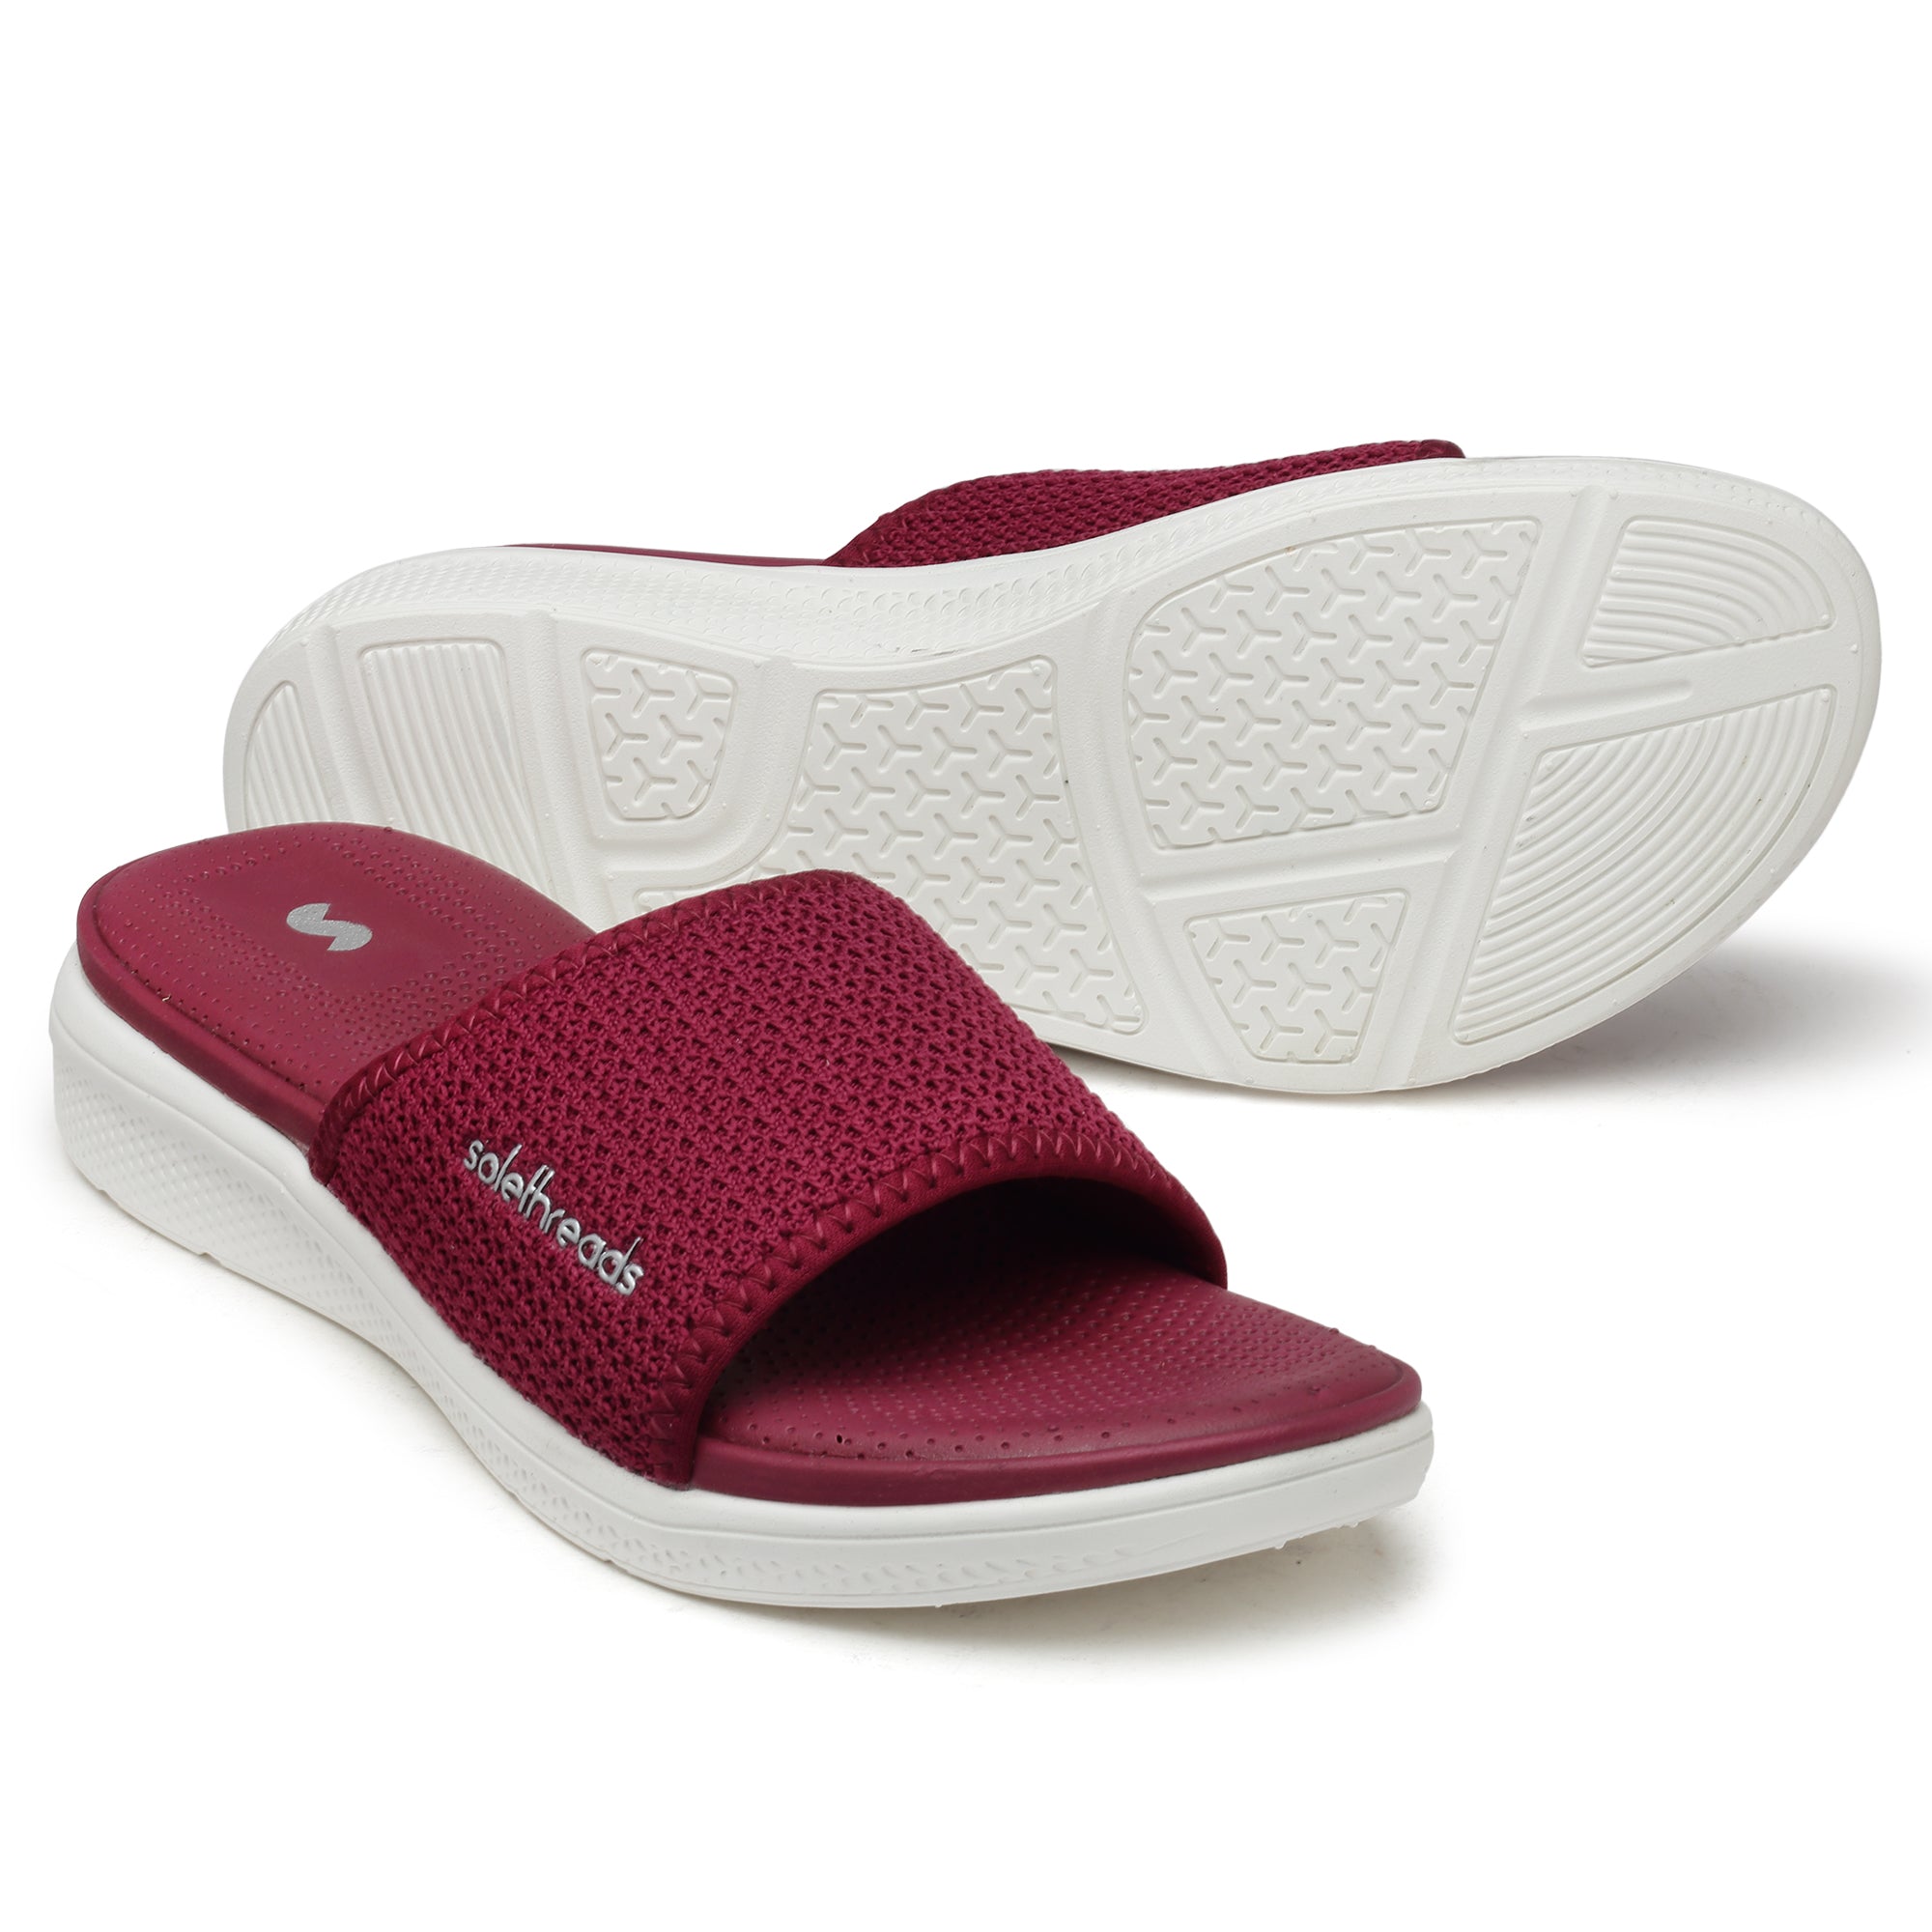 Fashionable Everyday Slides for Women